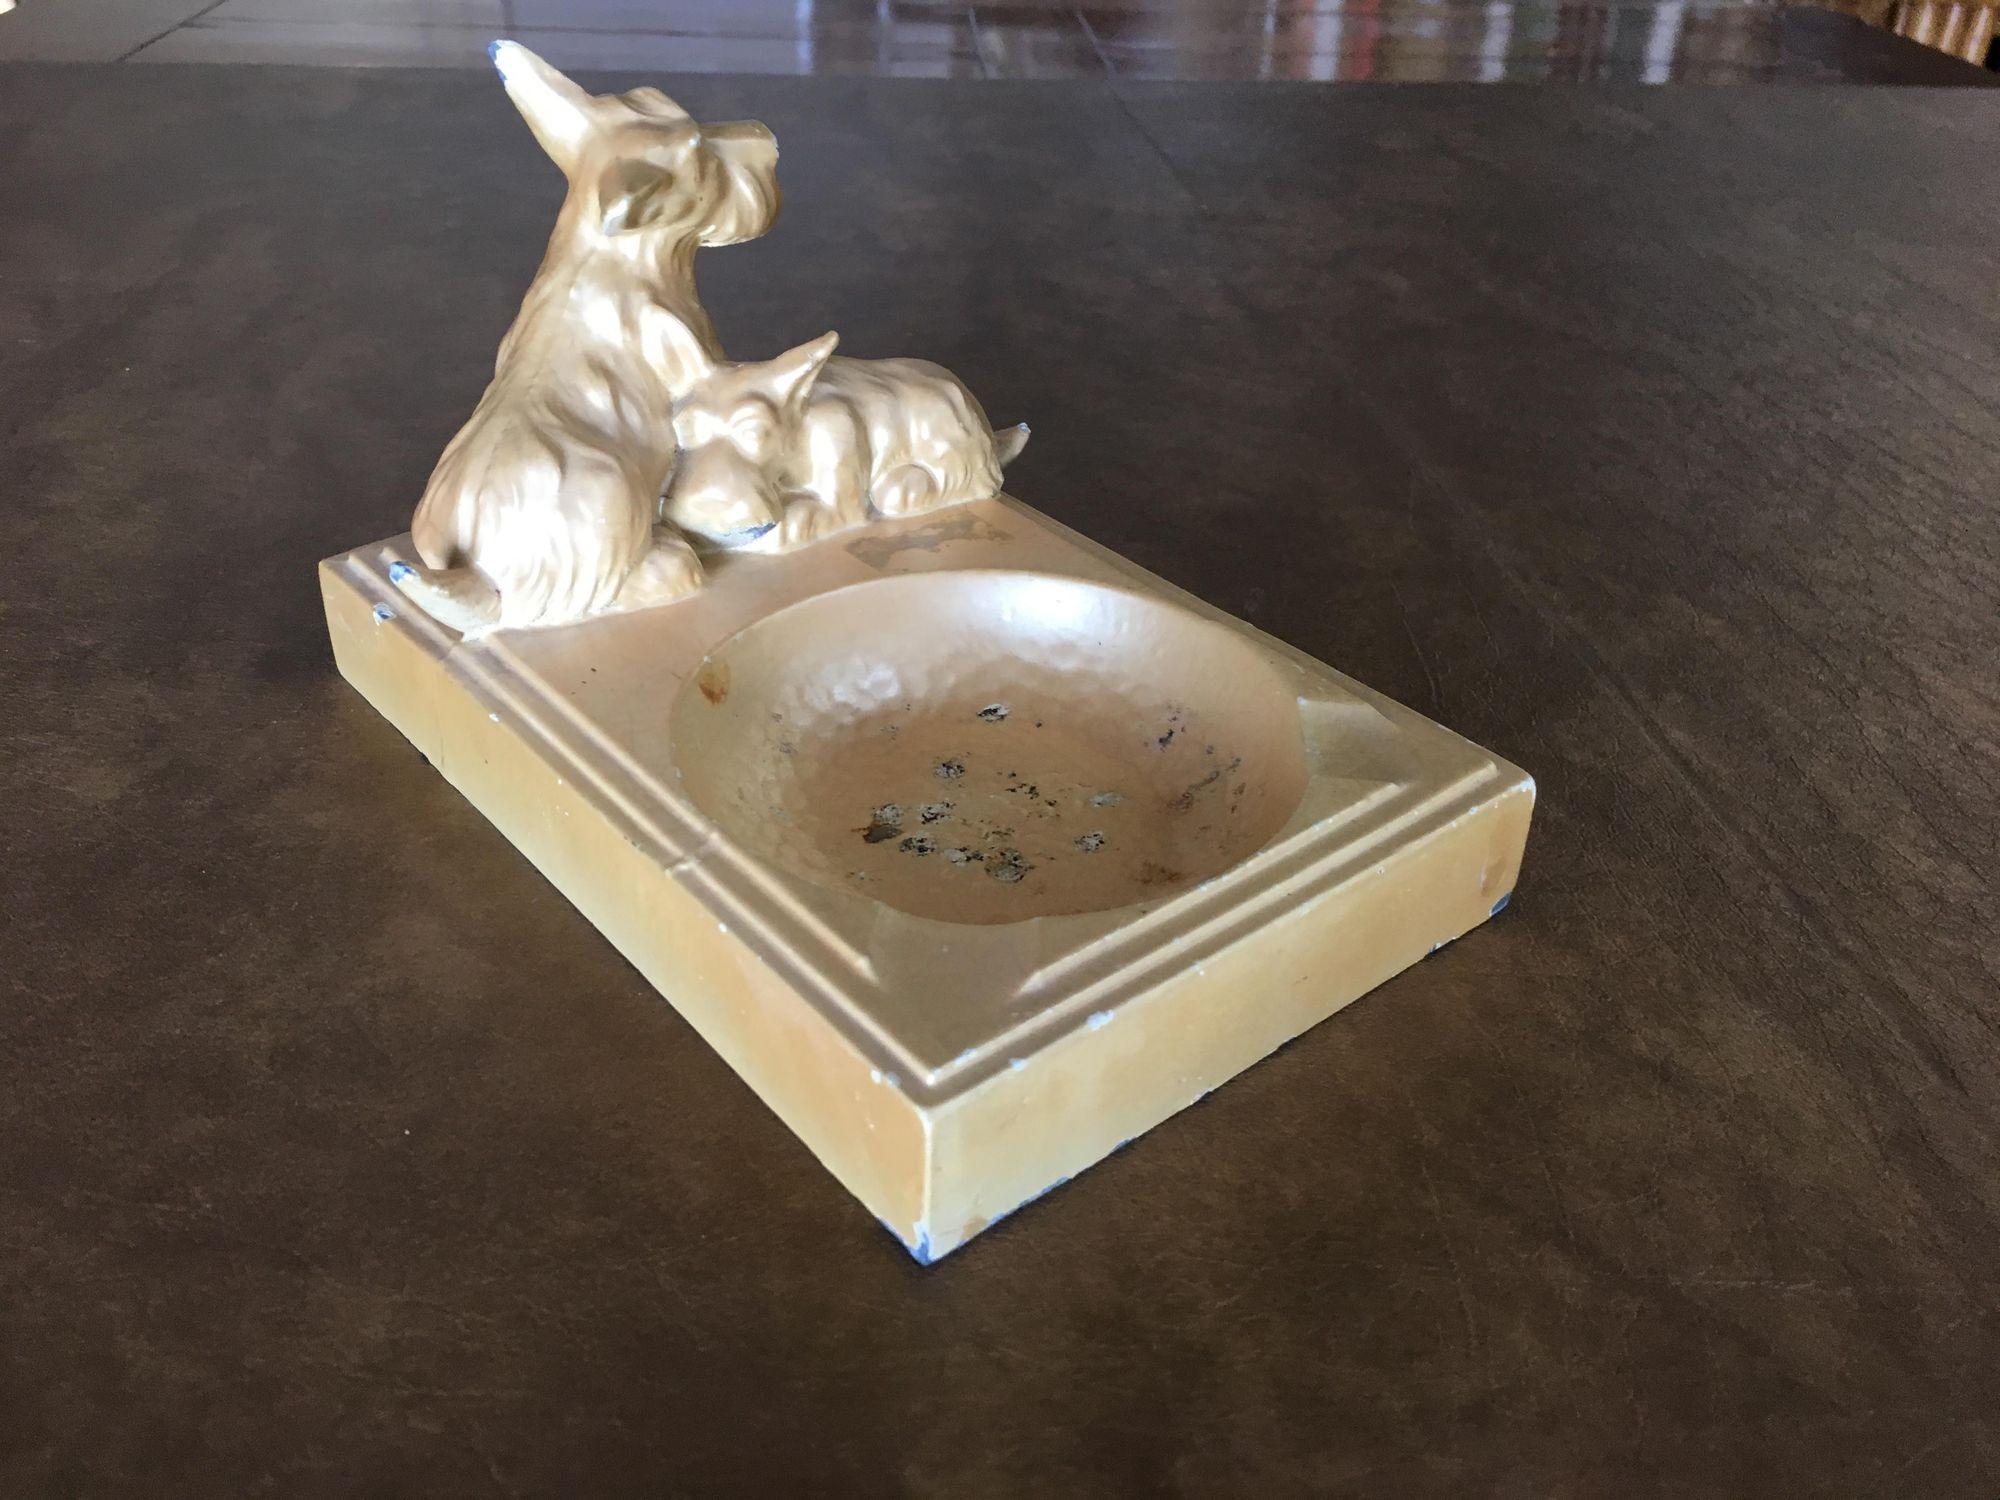 Art Deco enameled beige spelter metal terrier dog ashtray featuring cigarette holder and 2 sculptural dogs along the top. This piece has some wear in the bowl of the ashtray and along its edges.

Dimensions:
4